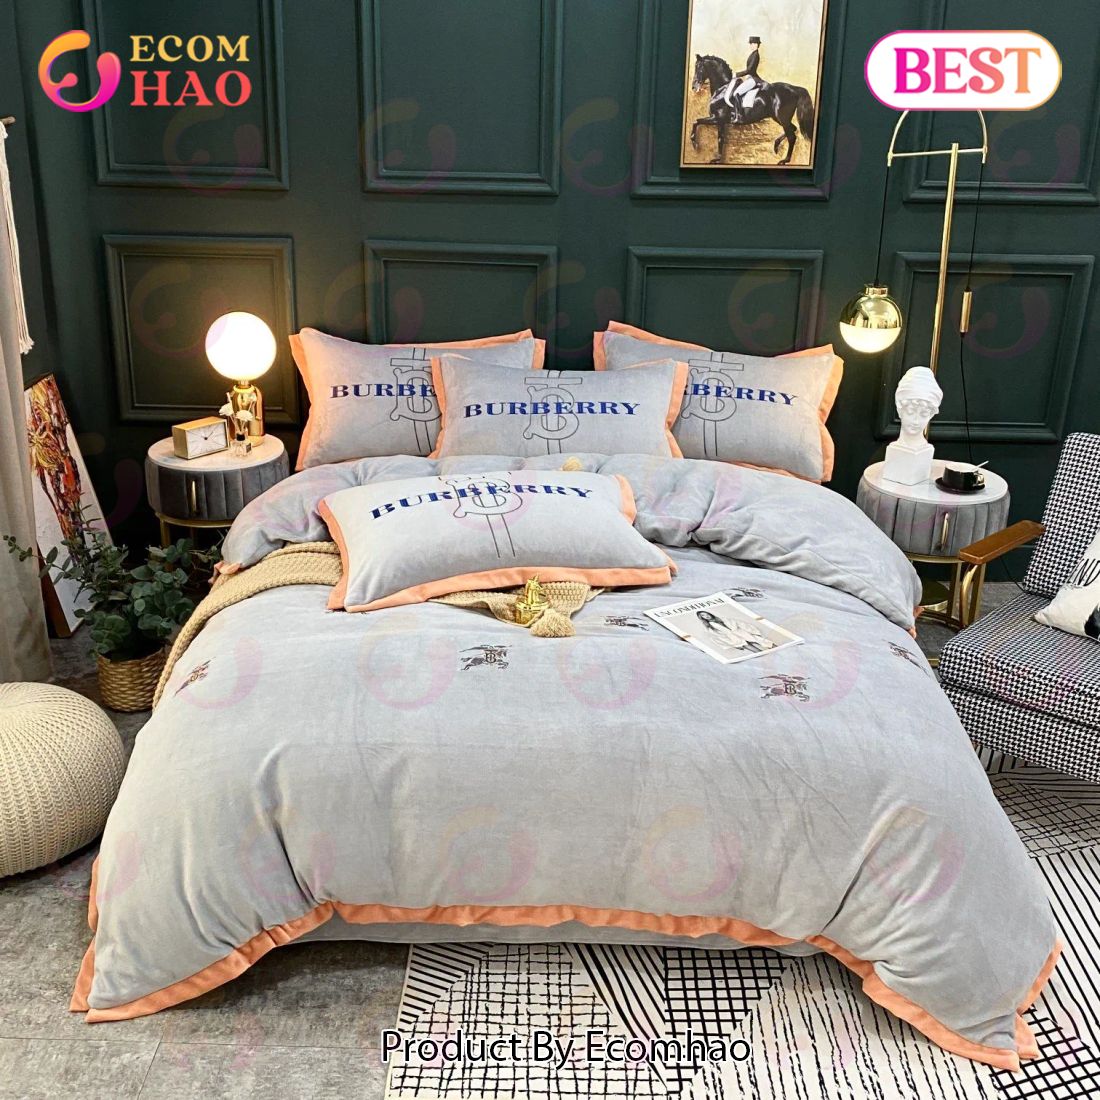 Burberry Grey Fashion New Bedding Sets Quilt Sets Duvet Cover Luxury Brand Bedding Decor Bedroom Sets Best Luxury Bed Sets Gift Thankgivings And Christmas